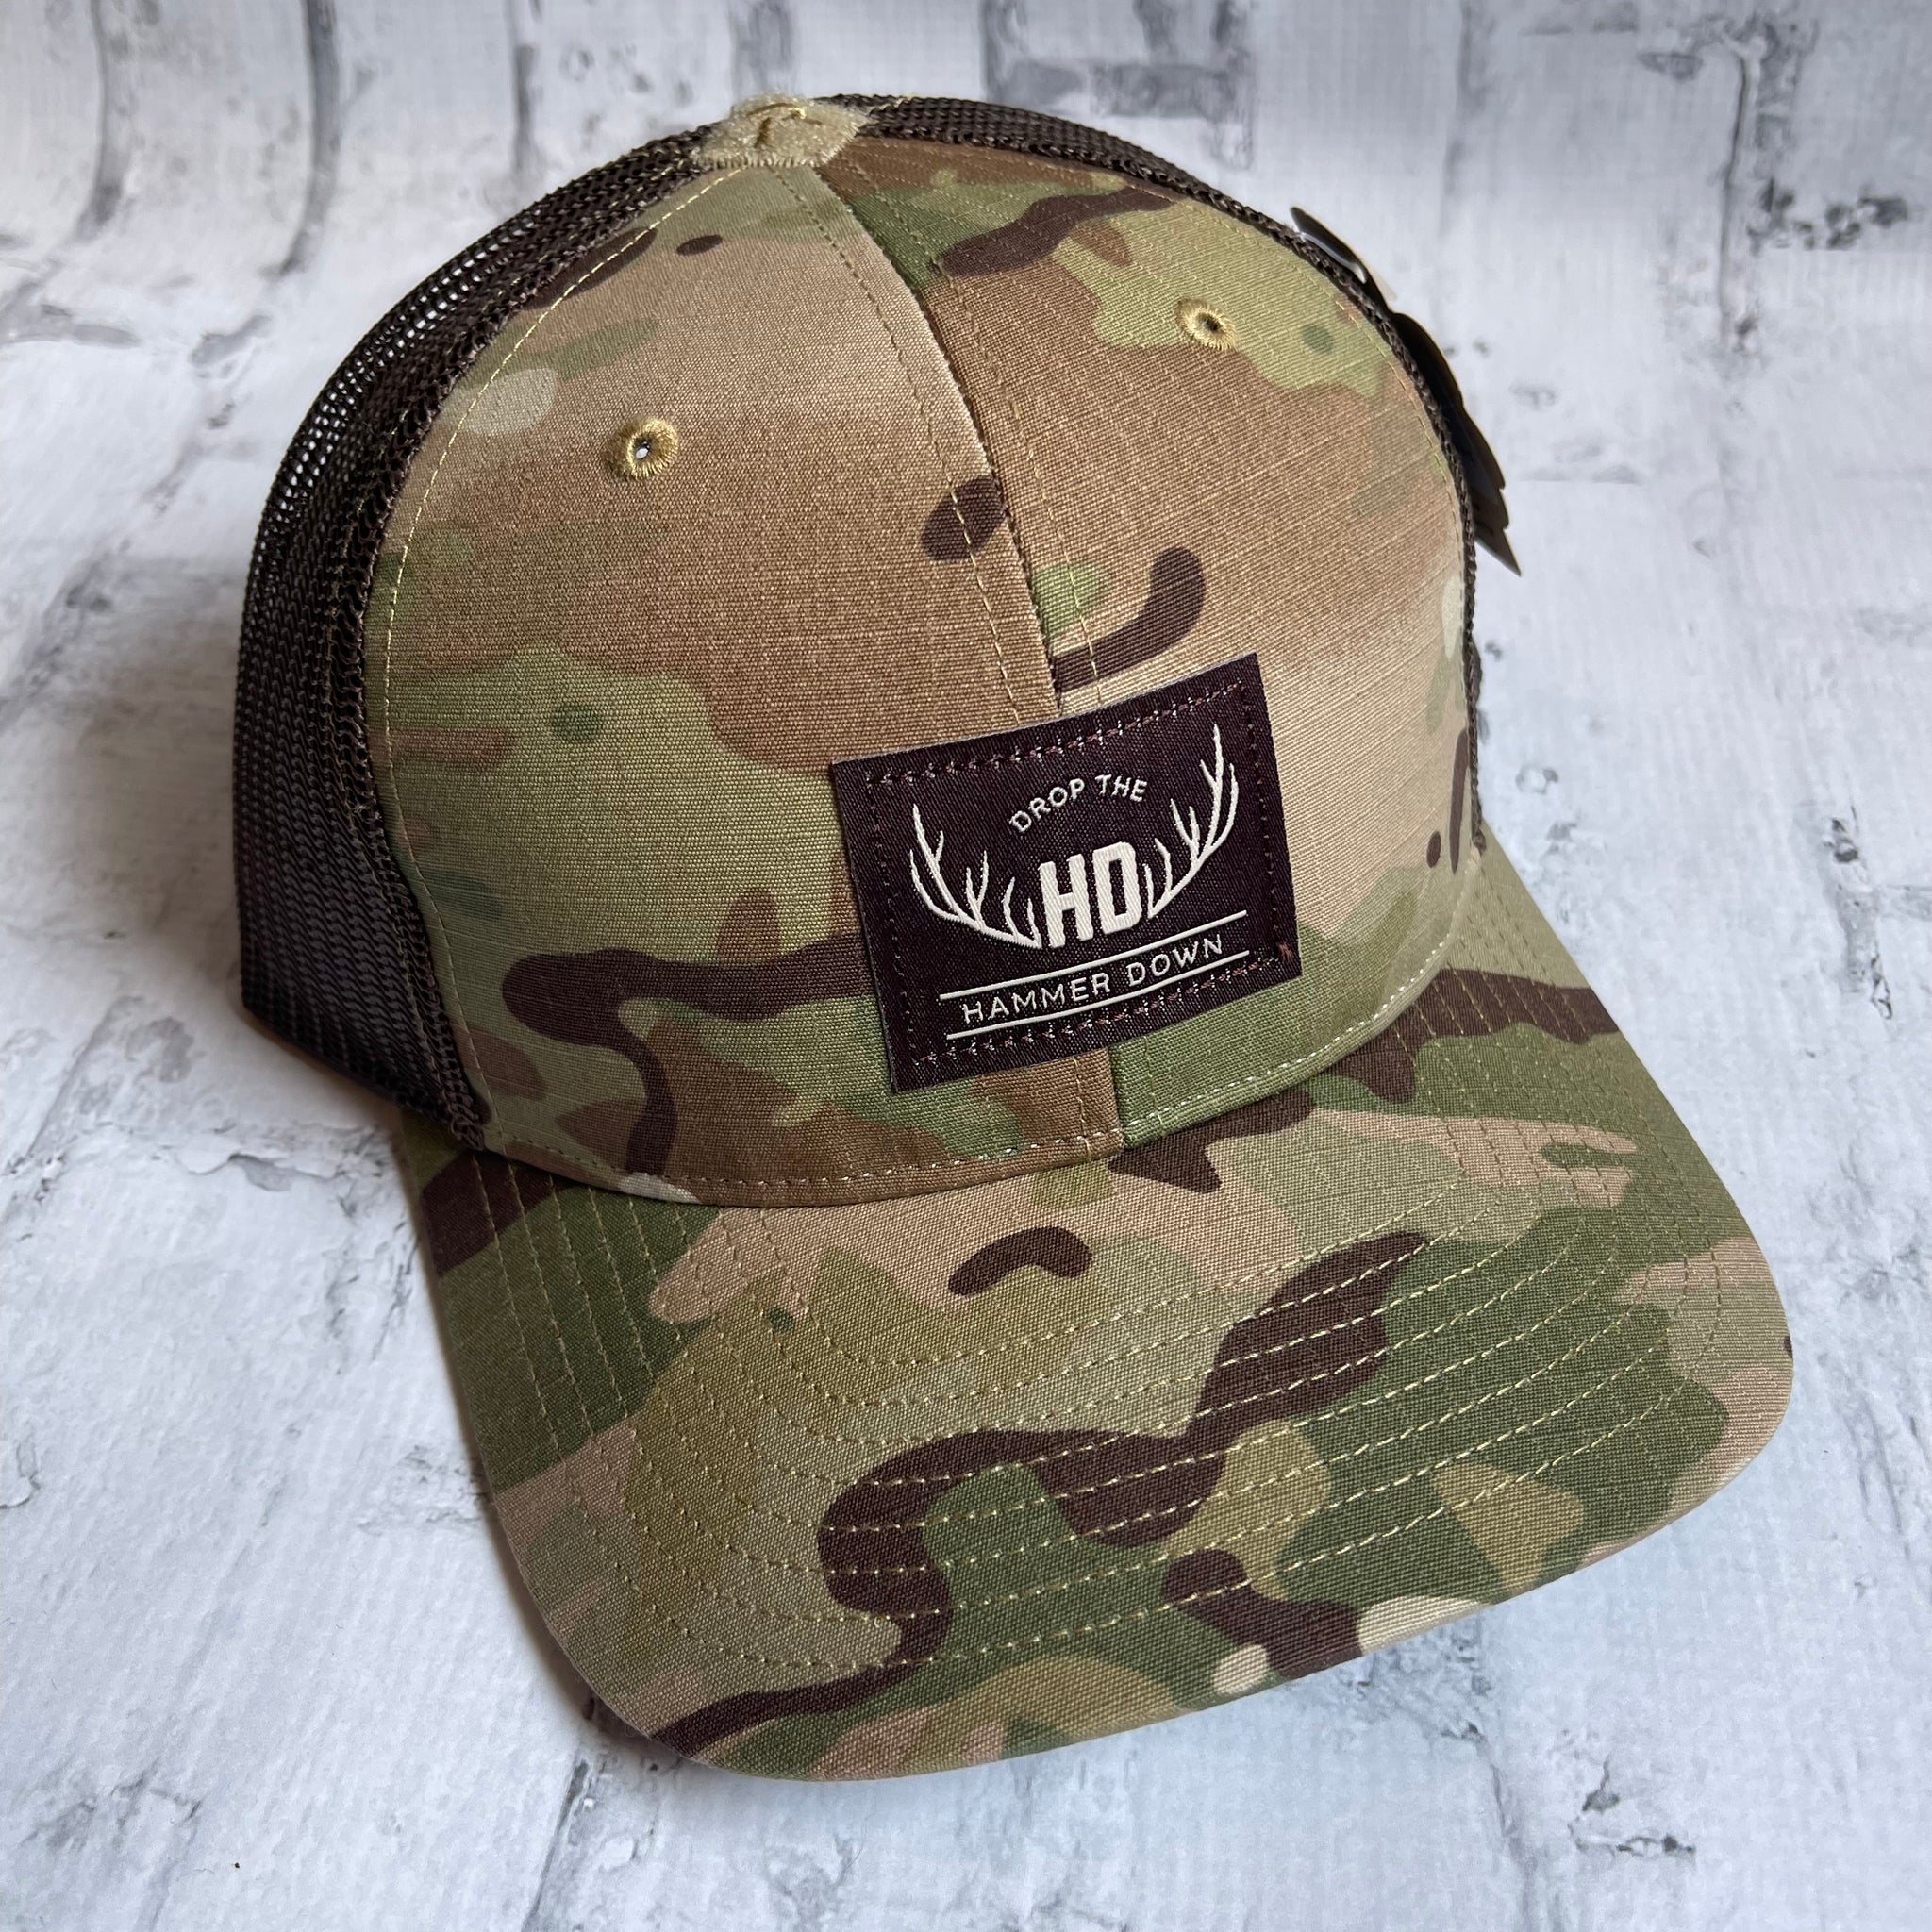 Hammer Down "Brown DTH Antlers" Hat - Camo with Leather Patch - Southern Charm "Shop The Charm"